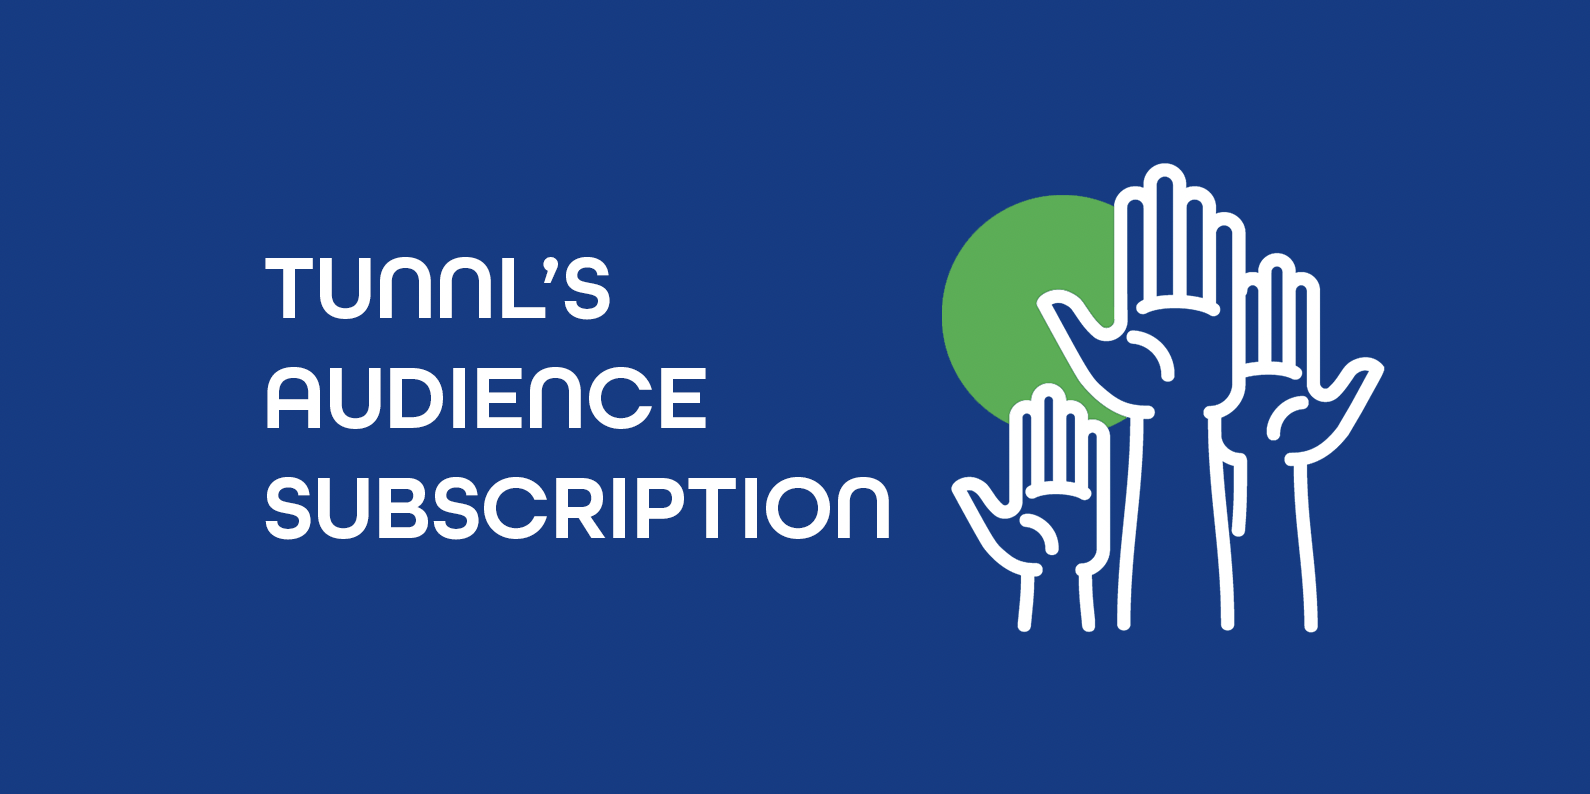 What Is Tunnl's Audience Subscription? Here Is What You Need To Know